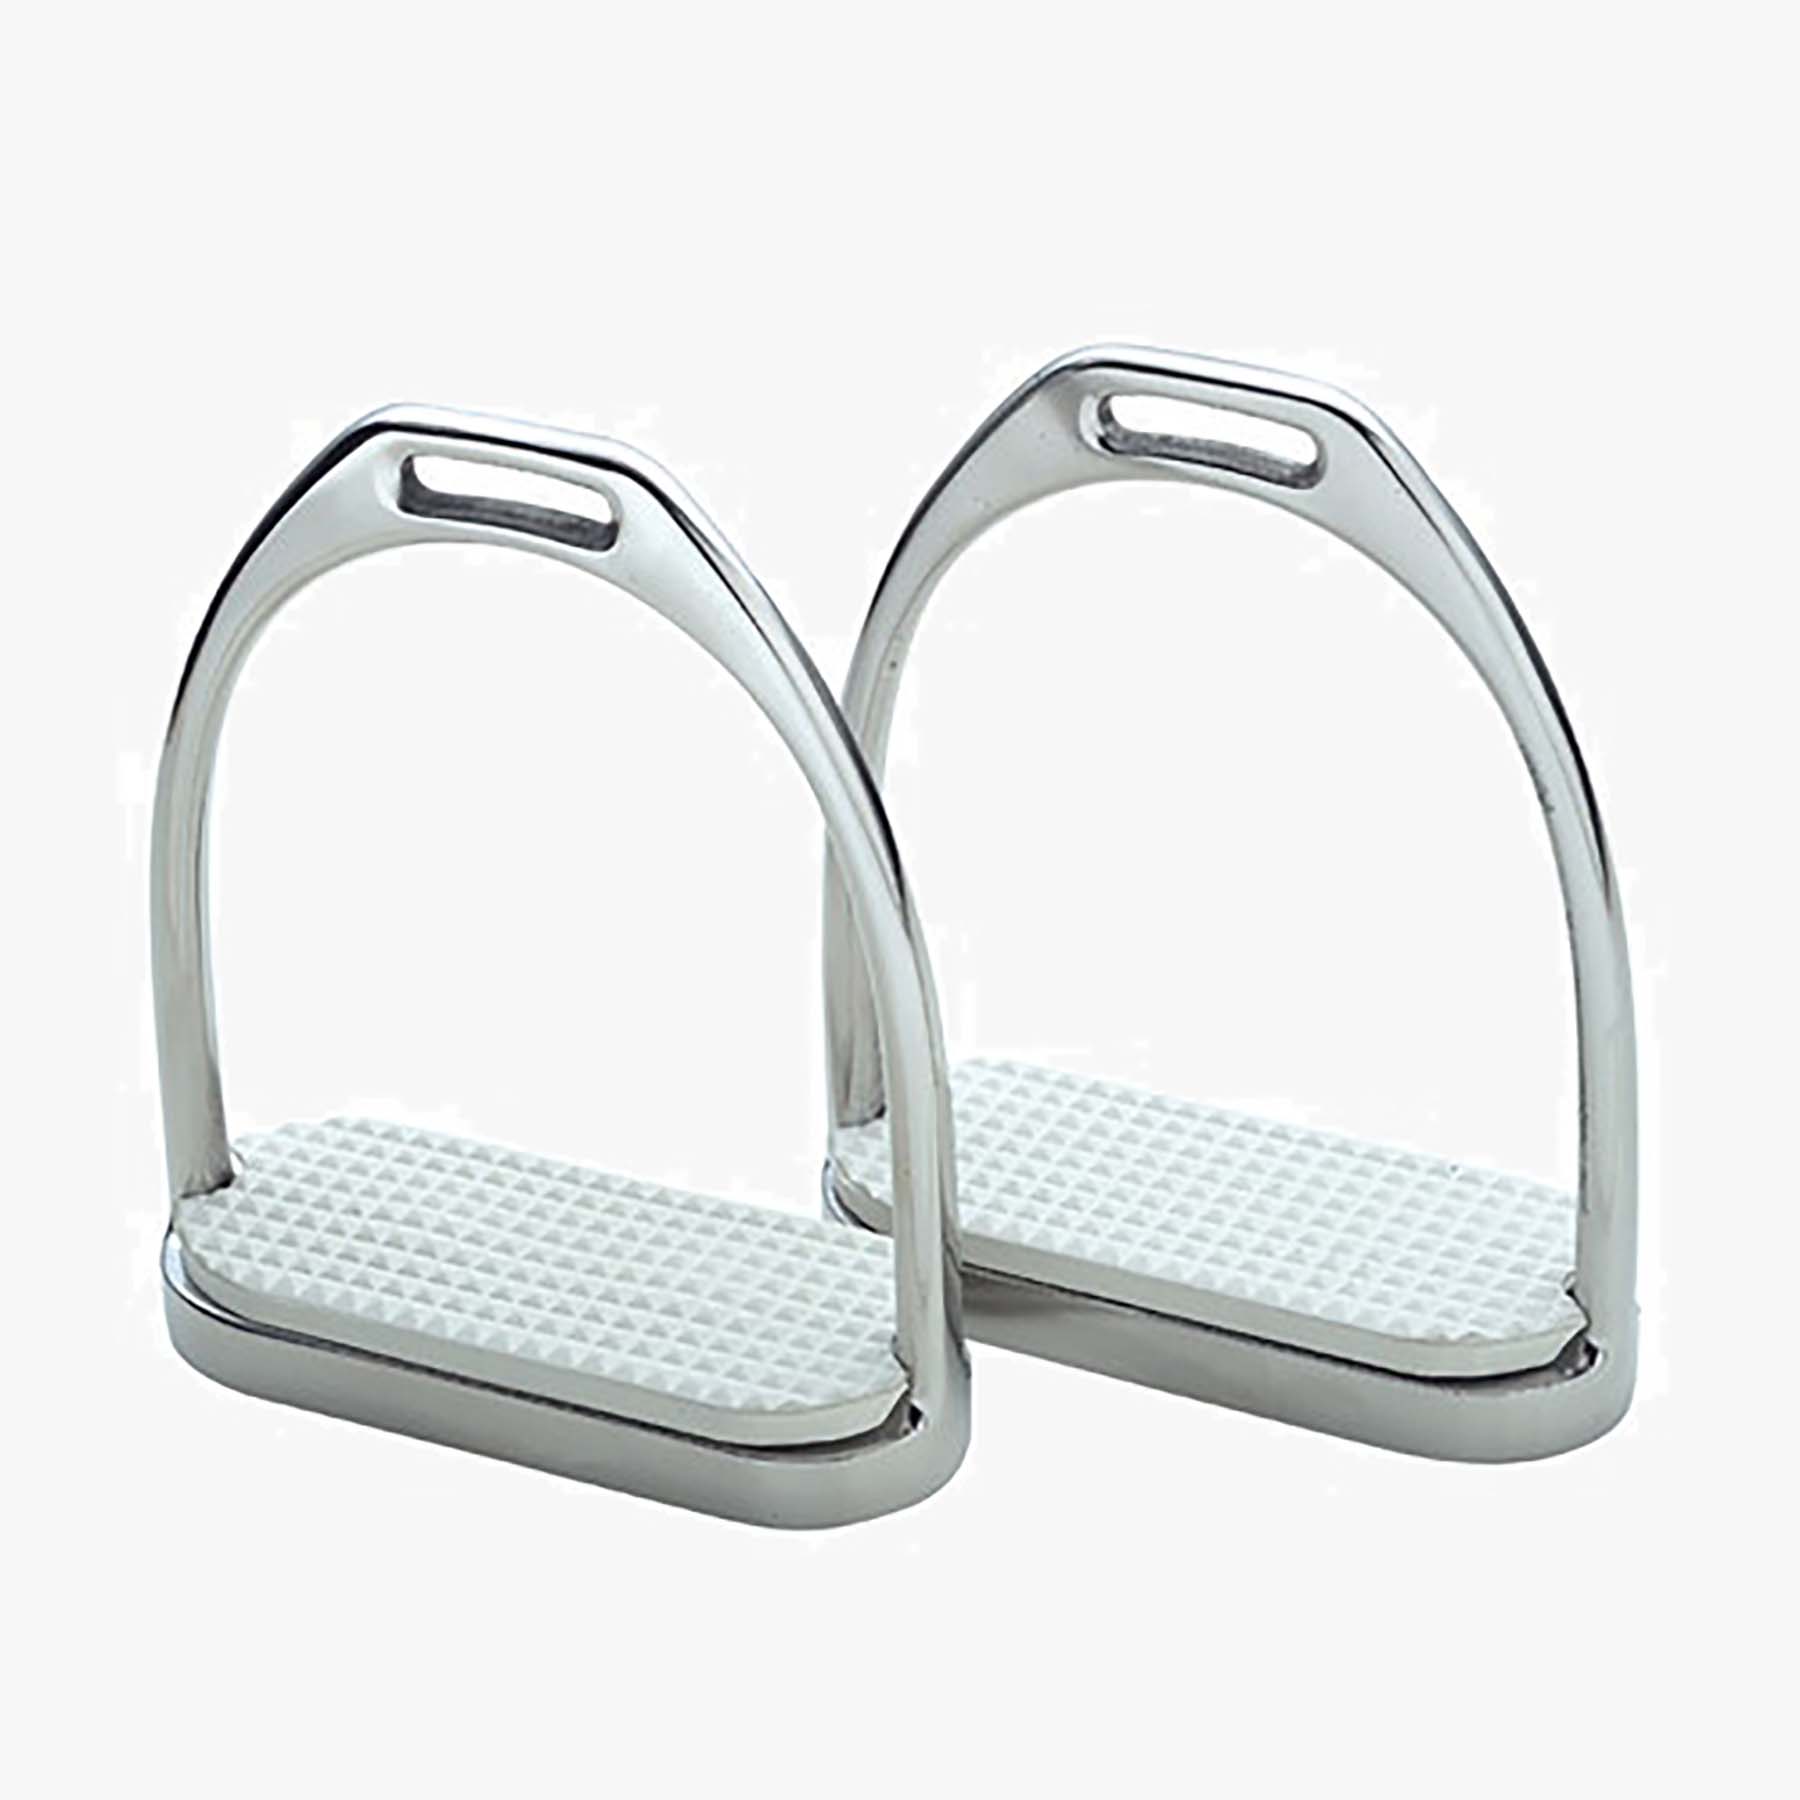 Shires stainless steel stirrup irons